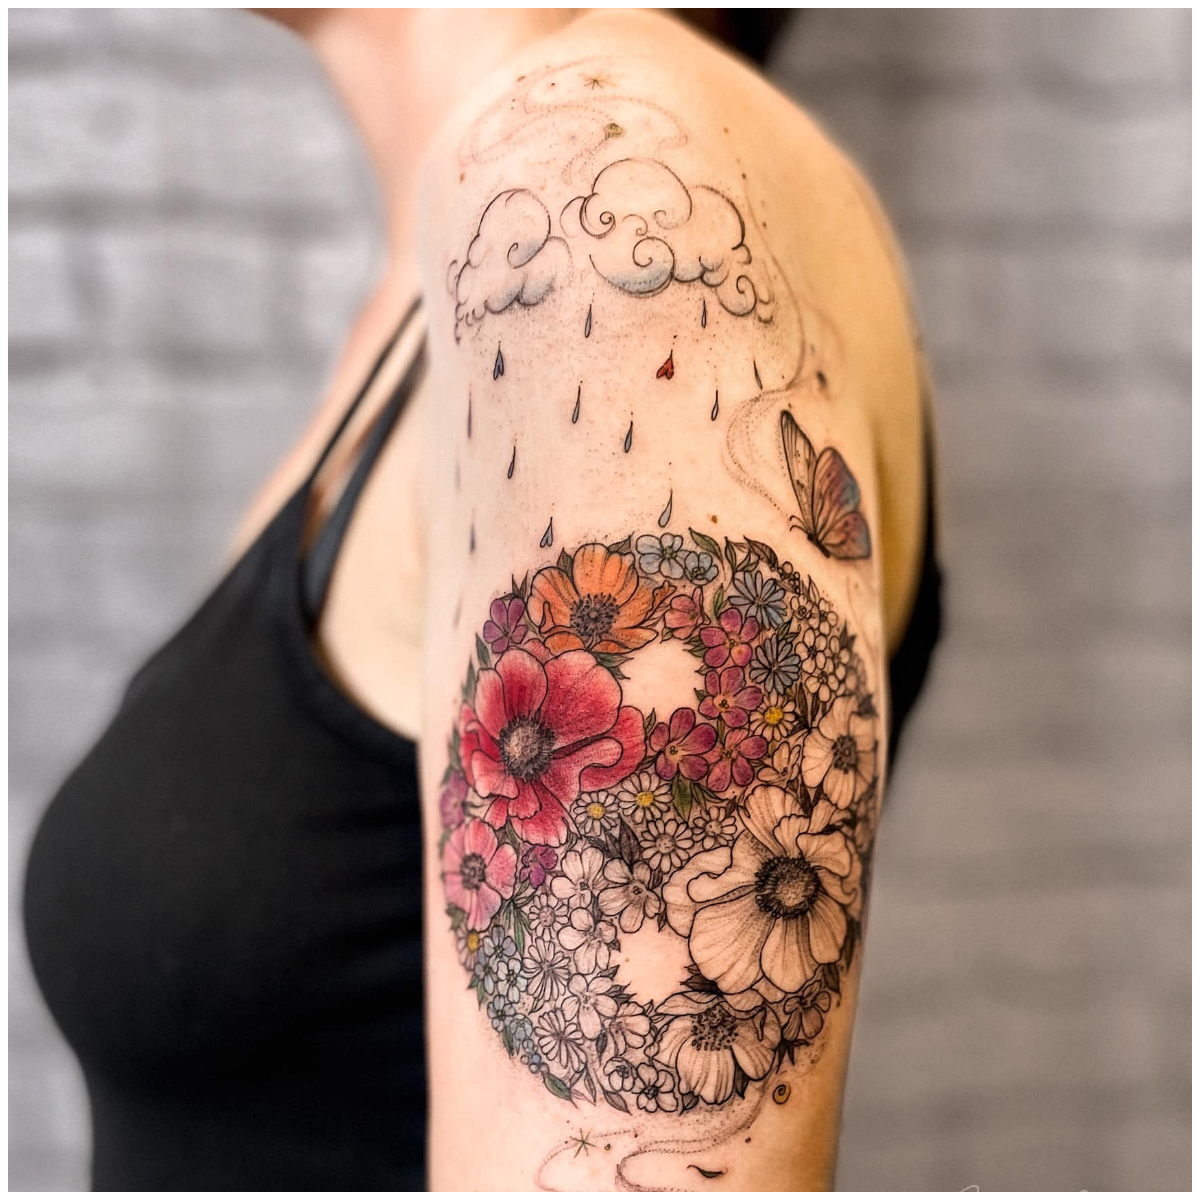 Sunflowers and a pachyderm #elephant #elephanttattoo #halfsleeve #flower # flowers #flowertattoo #flowertattoos #floral #floraltattoo #lin... |  Instagram